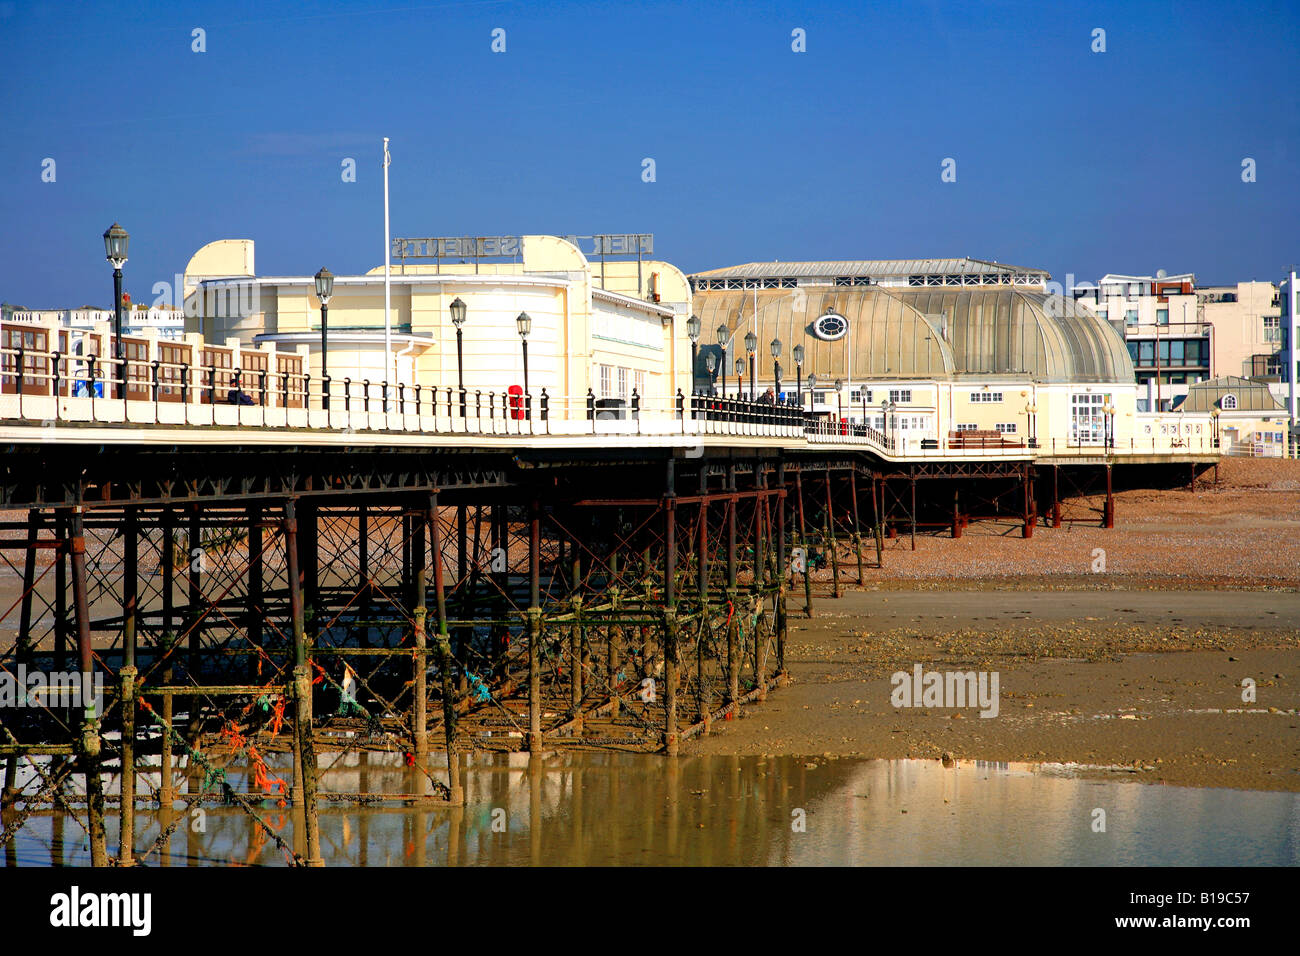 The Pavilion Theatre on the Victorian Pier Worthing Promenade West Sussex England Britain UK Stock Photo